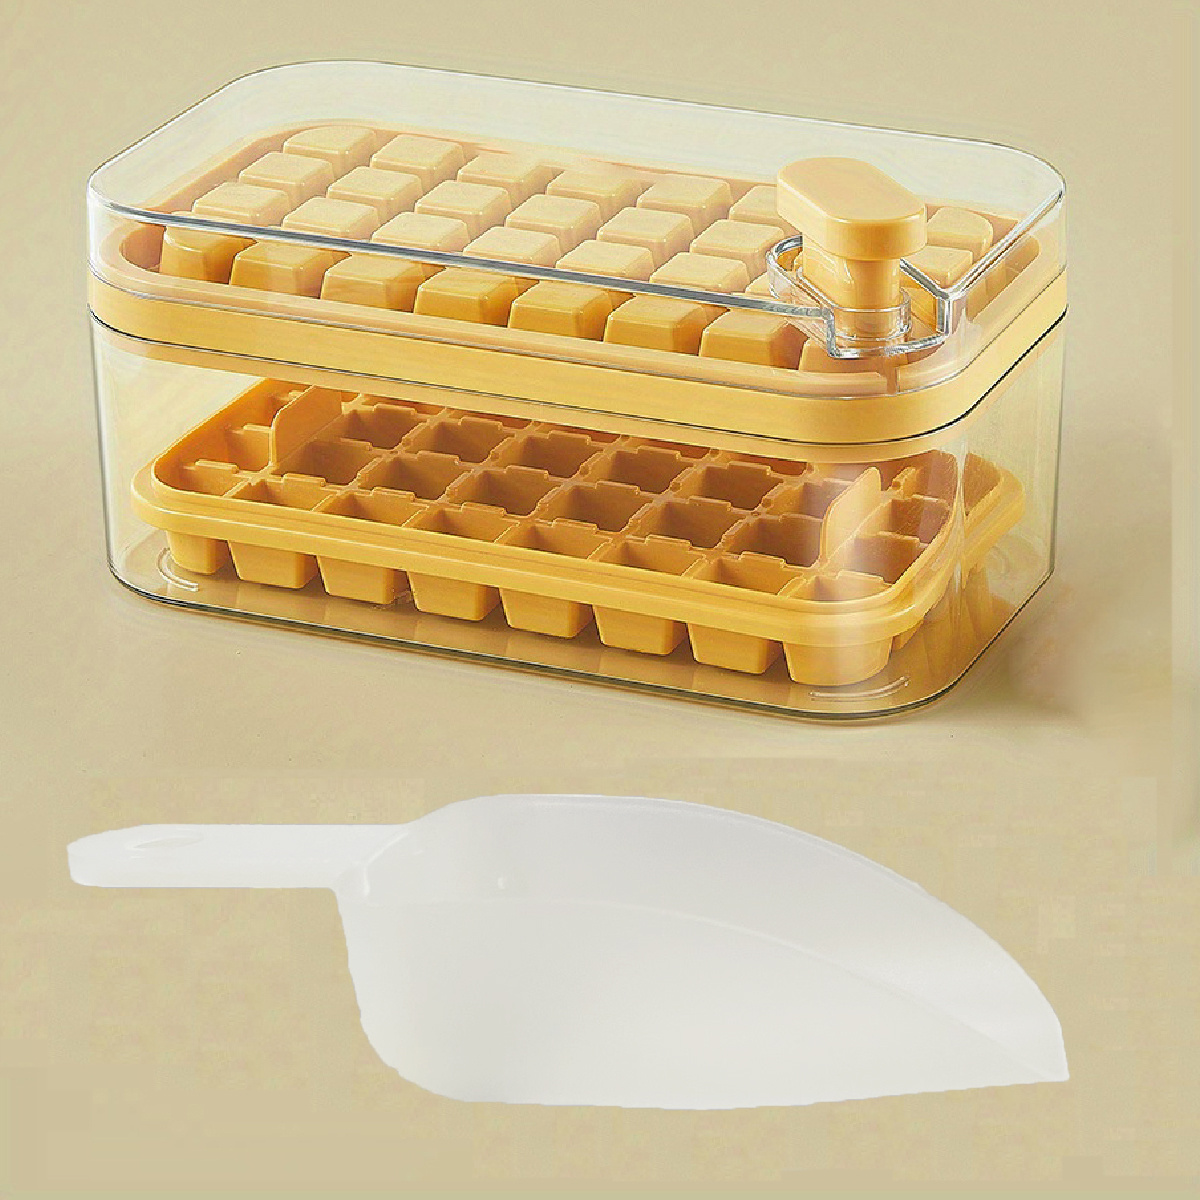 Easy Release Silicone 32 Ice Cuber Tray with Press lid and Bin - CPJC0292SG  - IdeaStage Promotional Products